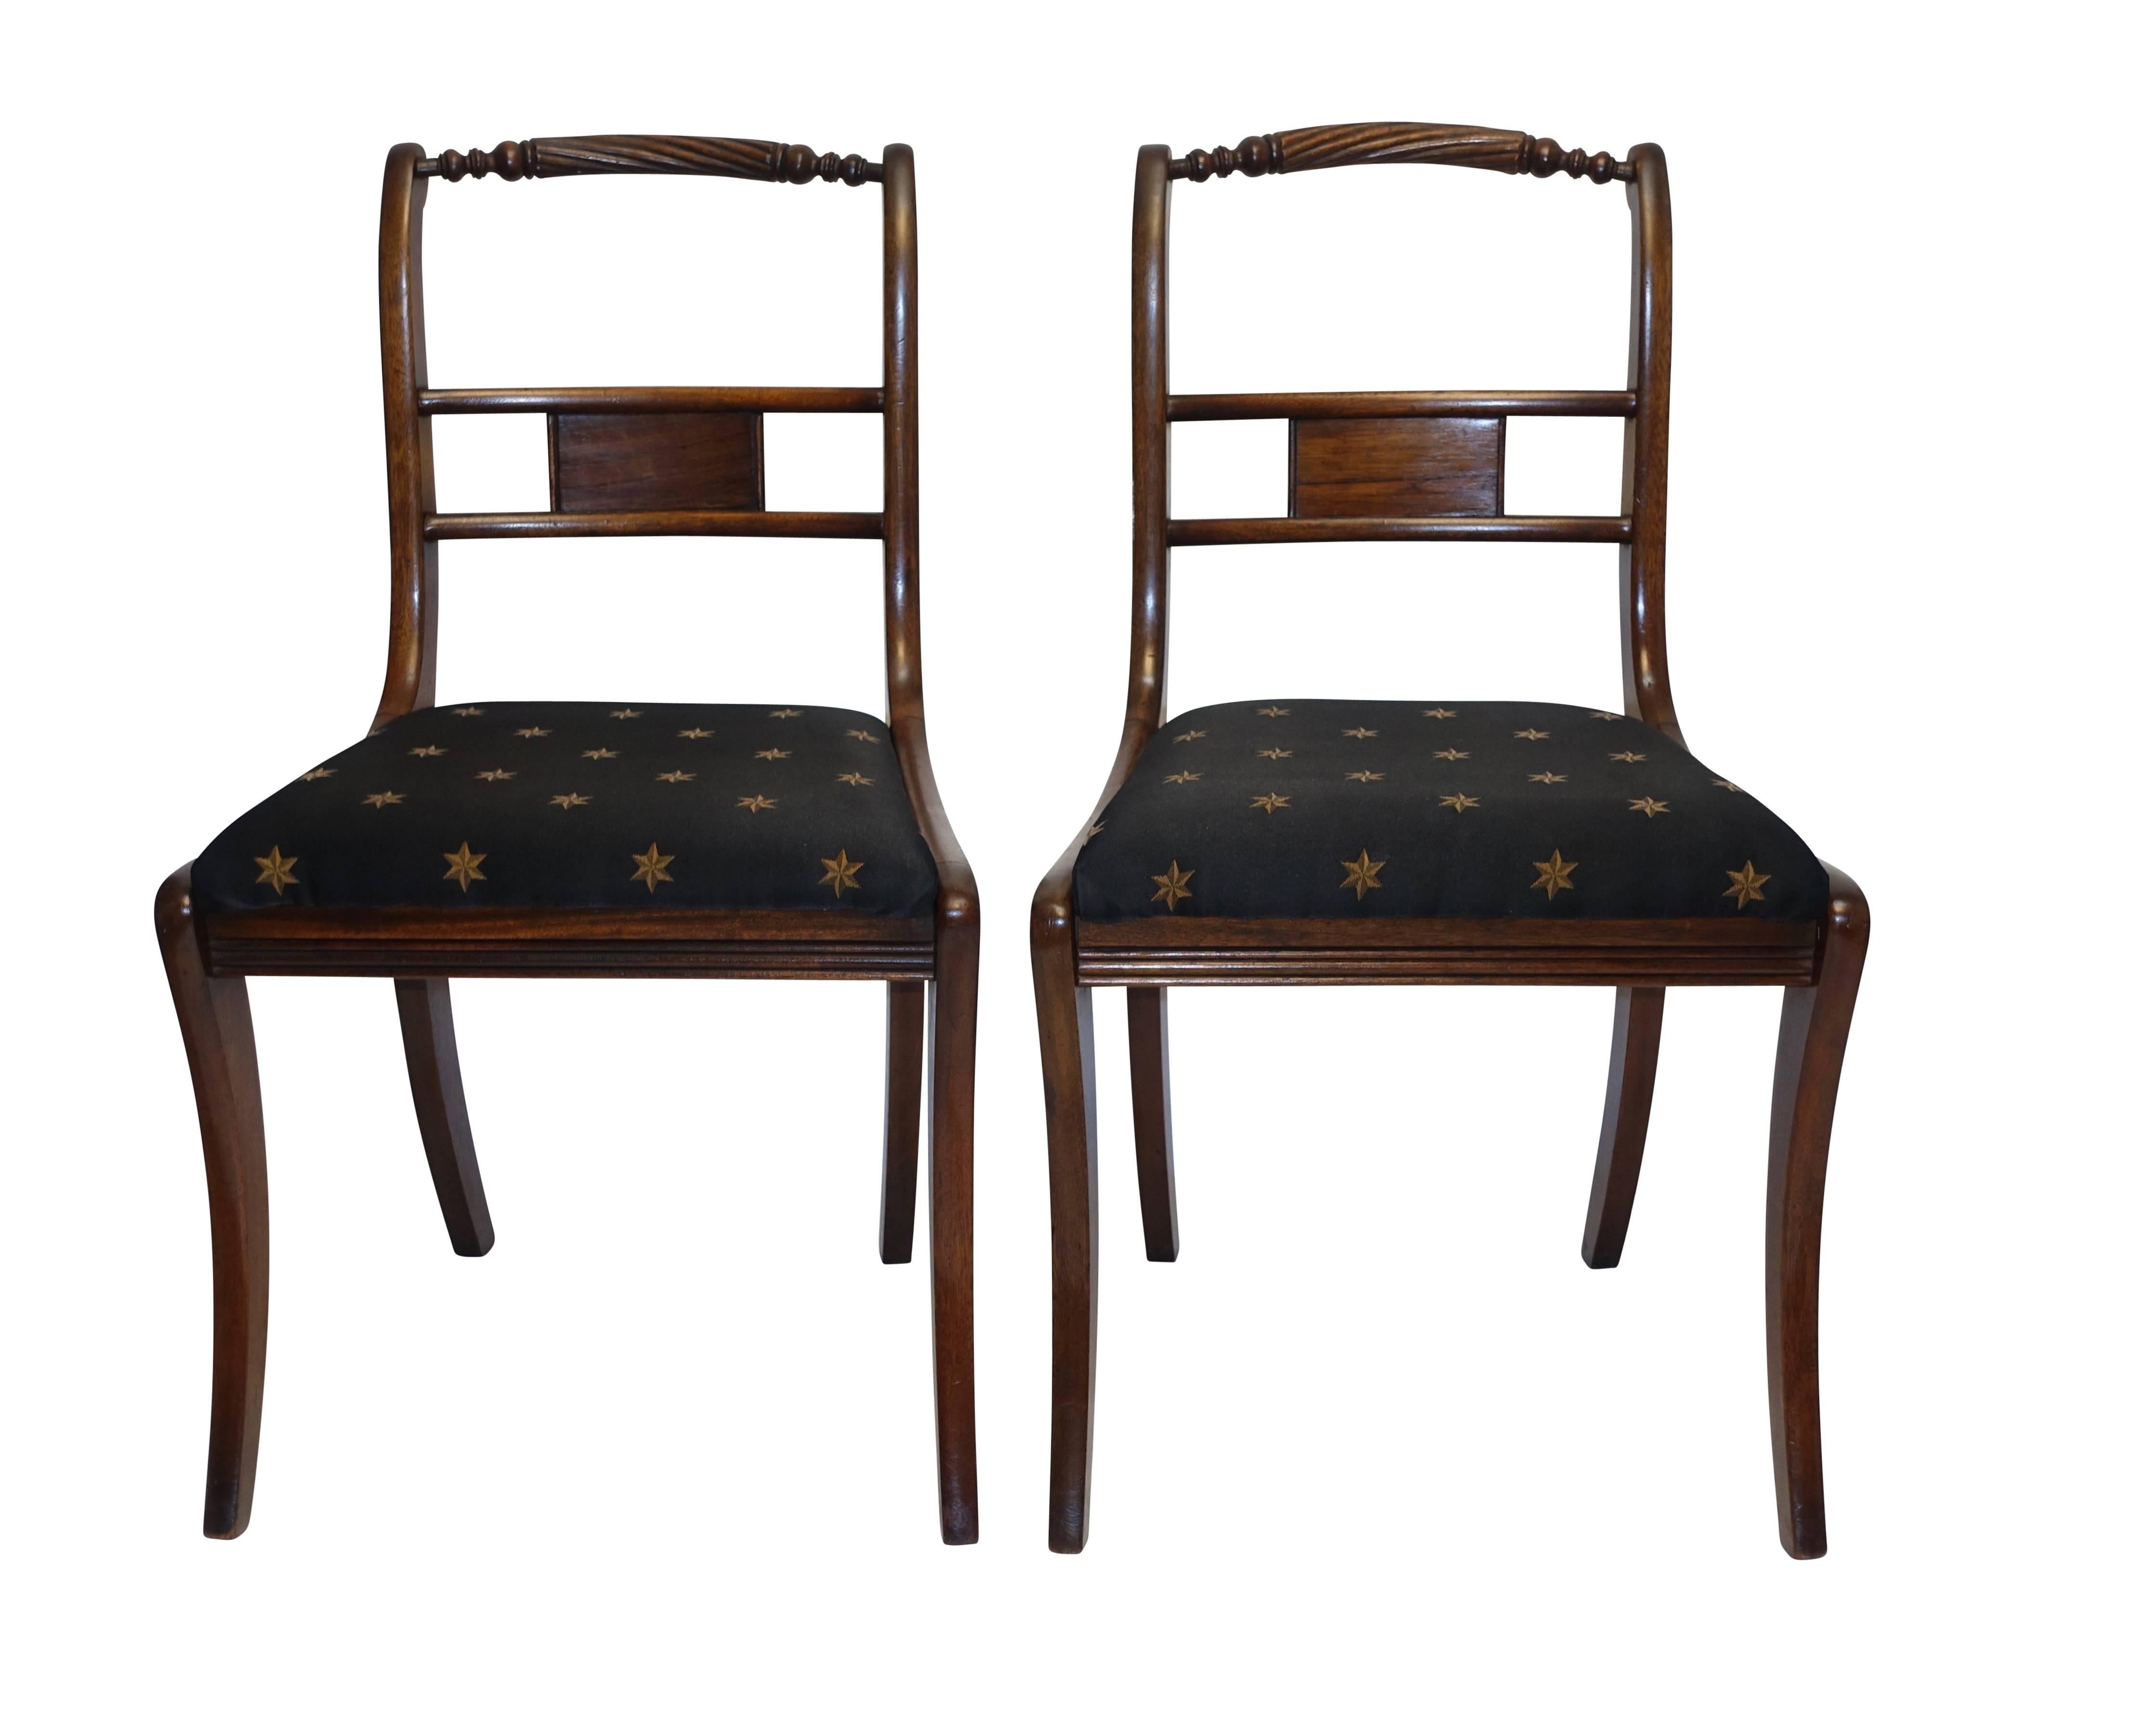 A very nice pair of rosewood dining side chairs with rope twisted and turned back rail, sitting on saber legs. England, circa 1820.